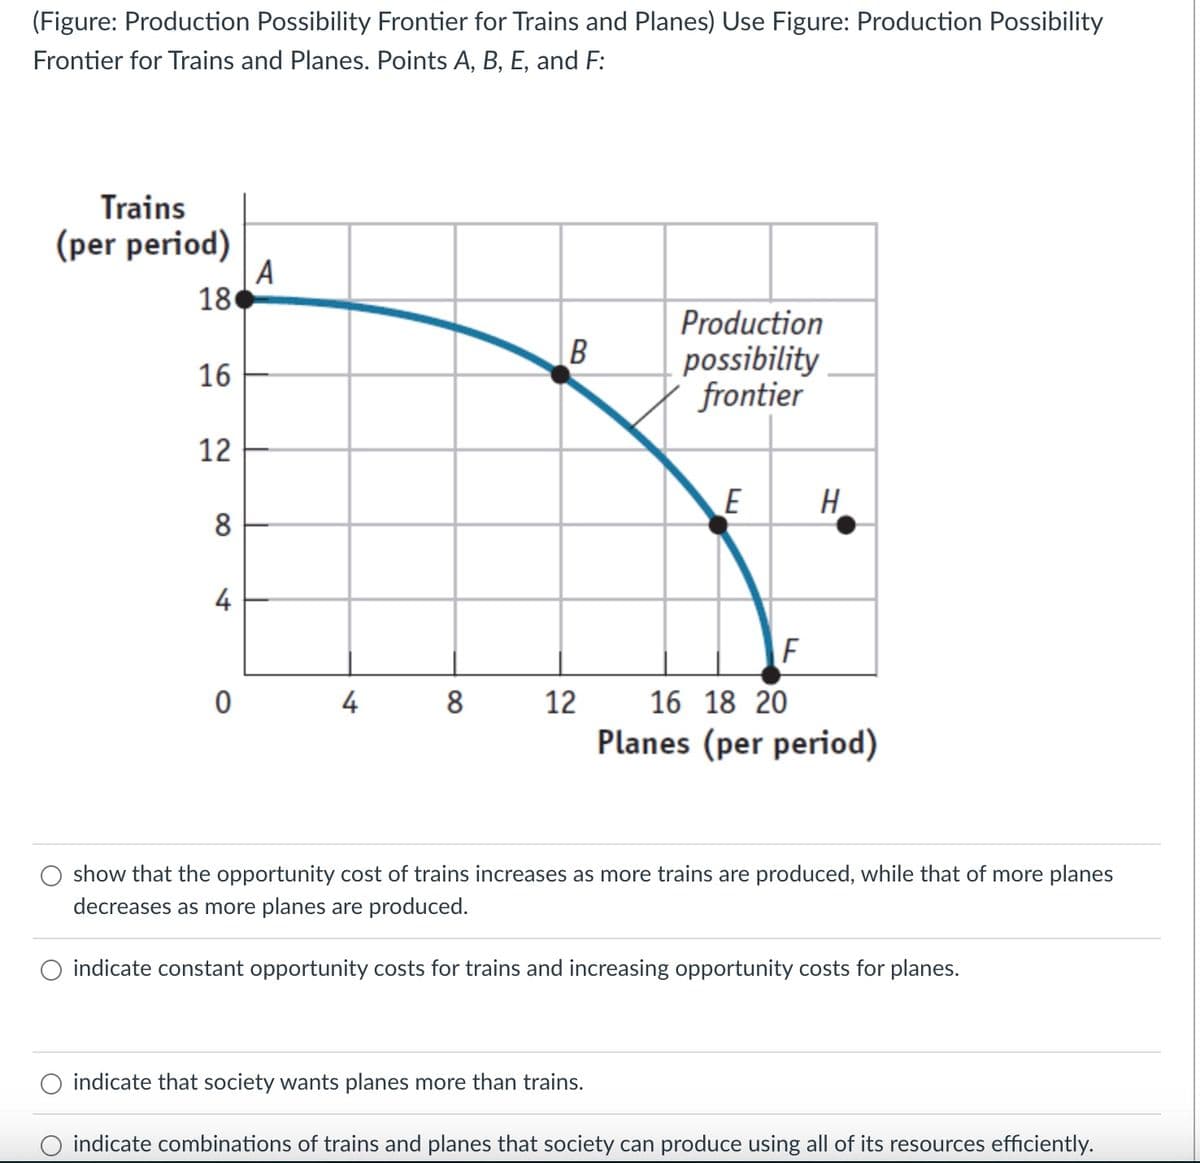 (Figure: Production Possibility Frontier for Trains and Planes) Use Figure: Production Possibility
Frontier for Trains and Planes. Points A, B, E, and F:
Trains
(per period)
18
16
12
8
4
0
A
4
8
B
12
Production
possibility
frontier
E
F
H
16 18 20
Planes (per period)
show that the opportunity cost of trains increases as more trains are produced, while that of more planes
decreases as more planes are produced.
indicate constant opportunity costs for trains and increasing opportunity costs for planes.
indicate that society wants planes more than trains.
indicate combinations of trains and planes that society can produce using all of its resources efficiently.